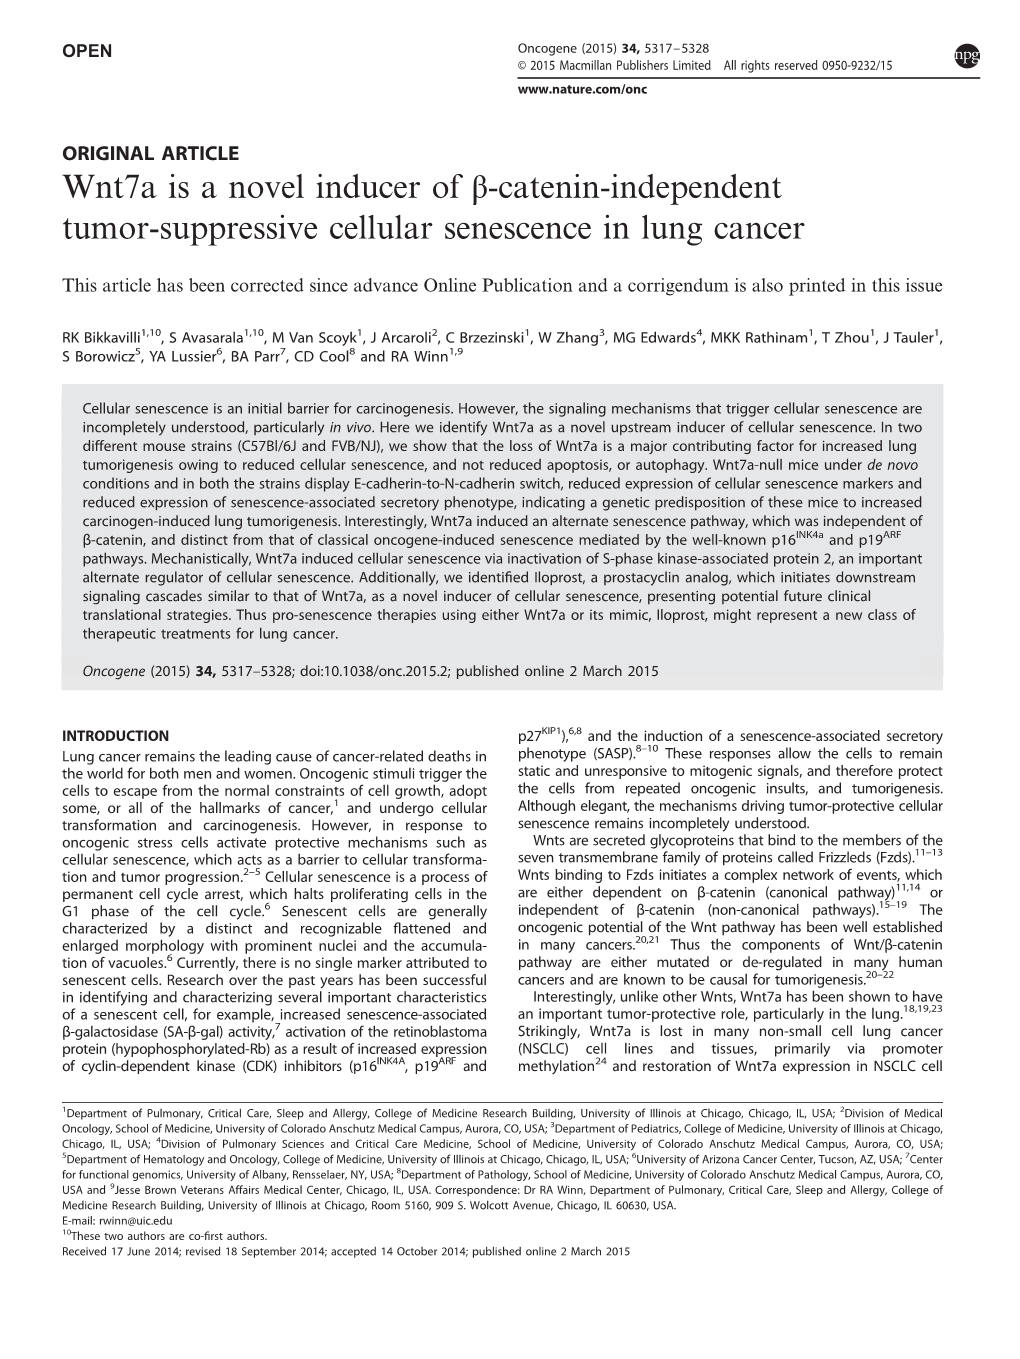 Catenin-Independent Tumor-Suppressive Cellular Senescence in Lung Cancer